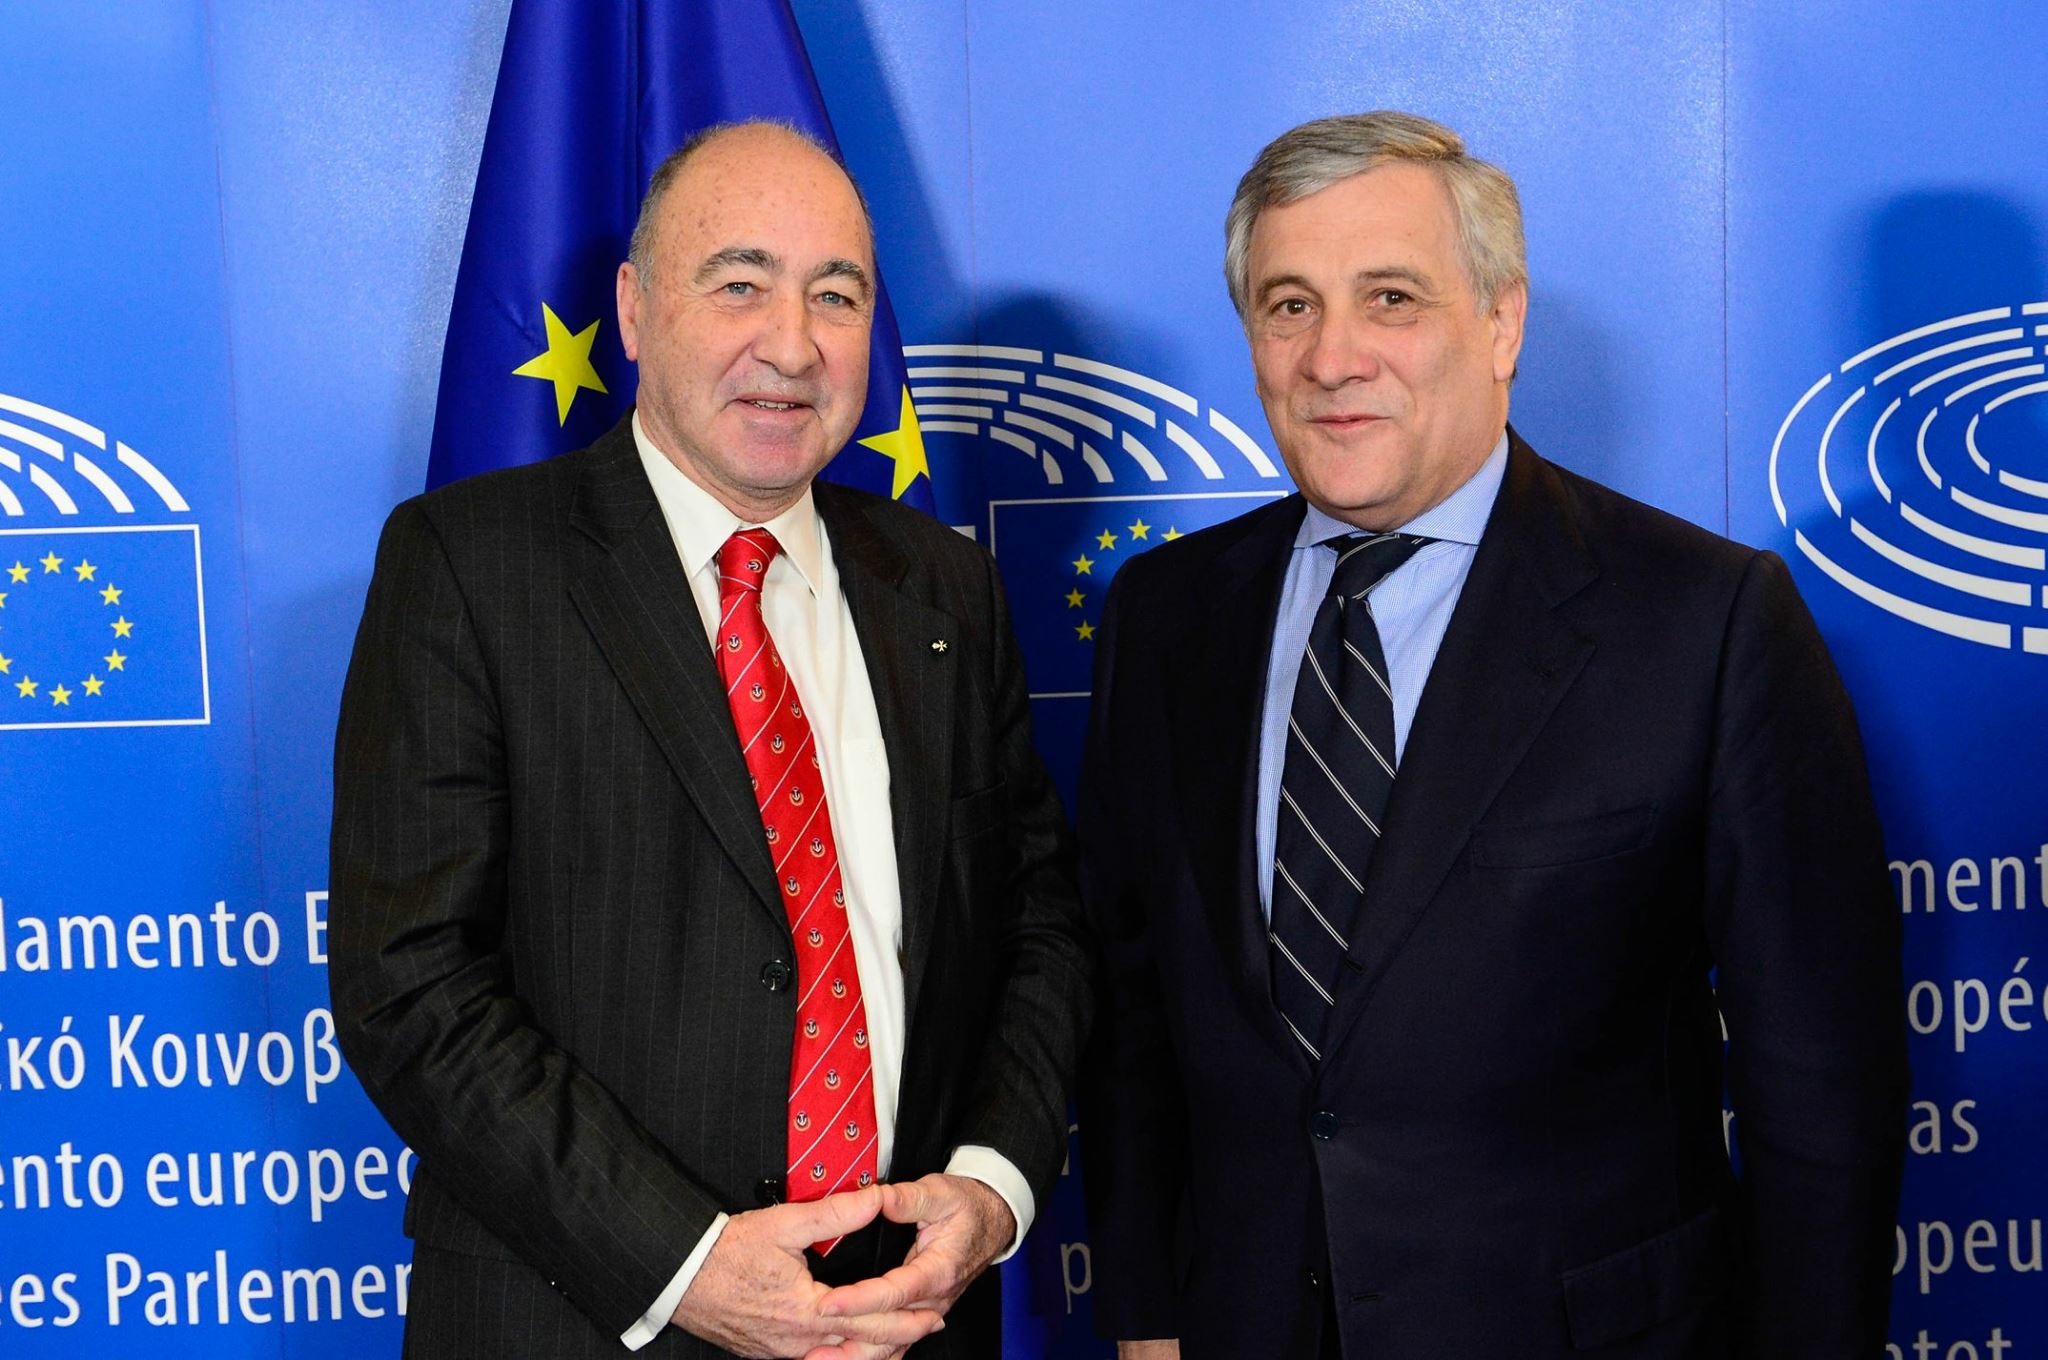 The Ambassador of the Order of Malta to the European Union was received by the President of the European Parliament